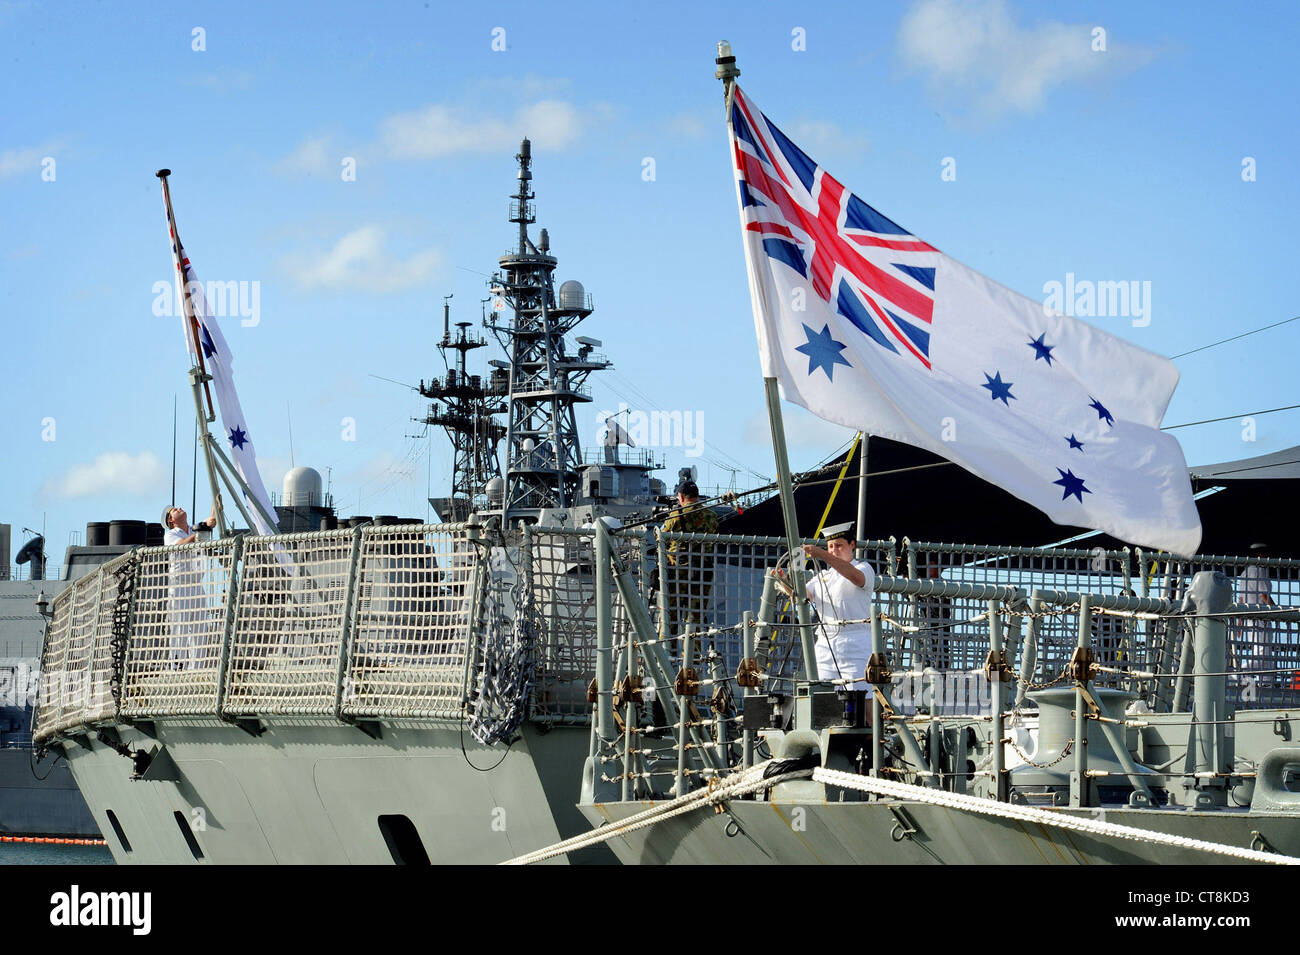 Australian sailors raise the colors aboard the Royal Australian navy Adelaide-class guided-missile frigate HMAS Darwin (FFG 04) and the Royal Australian navy Anzac-class frigate HMAS Perth (FFH 157) during Rim of the Pacific (RIMPAC) 2012. Twenty-two nations, 42 ships, six submarines, more than 200 aircraft and 25,000 personnel will participate in the biennial Rim of the Pacific (RIMPAC) 2012 exercise scheduled June 29 to Aug. 3, in and around the Hawaiian Islands. RIMPAC is the world's largest international maritime exercise Stock Photo